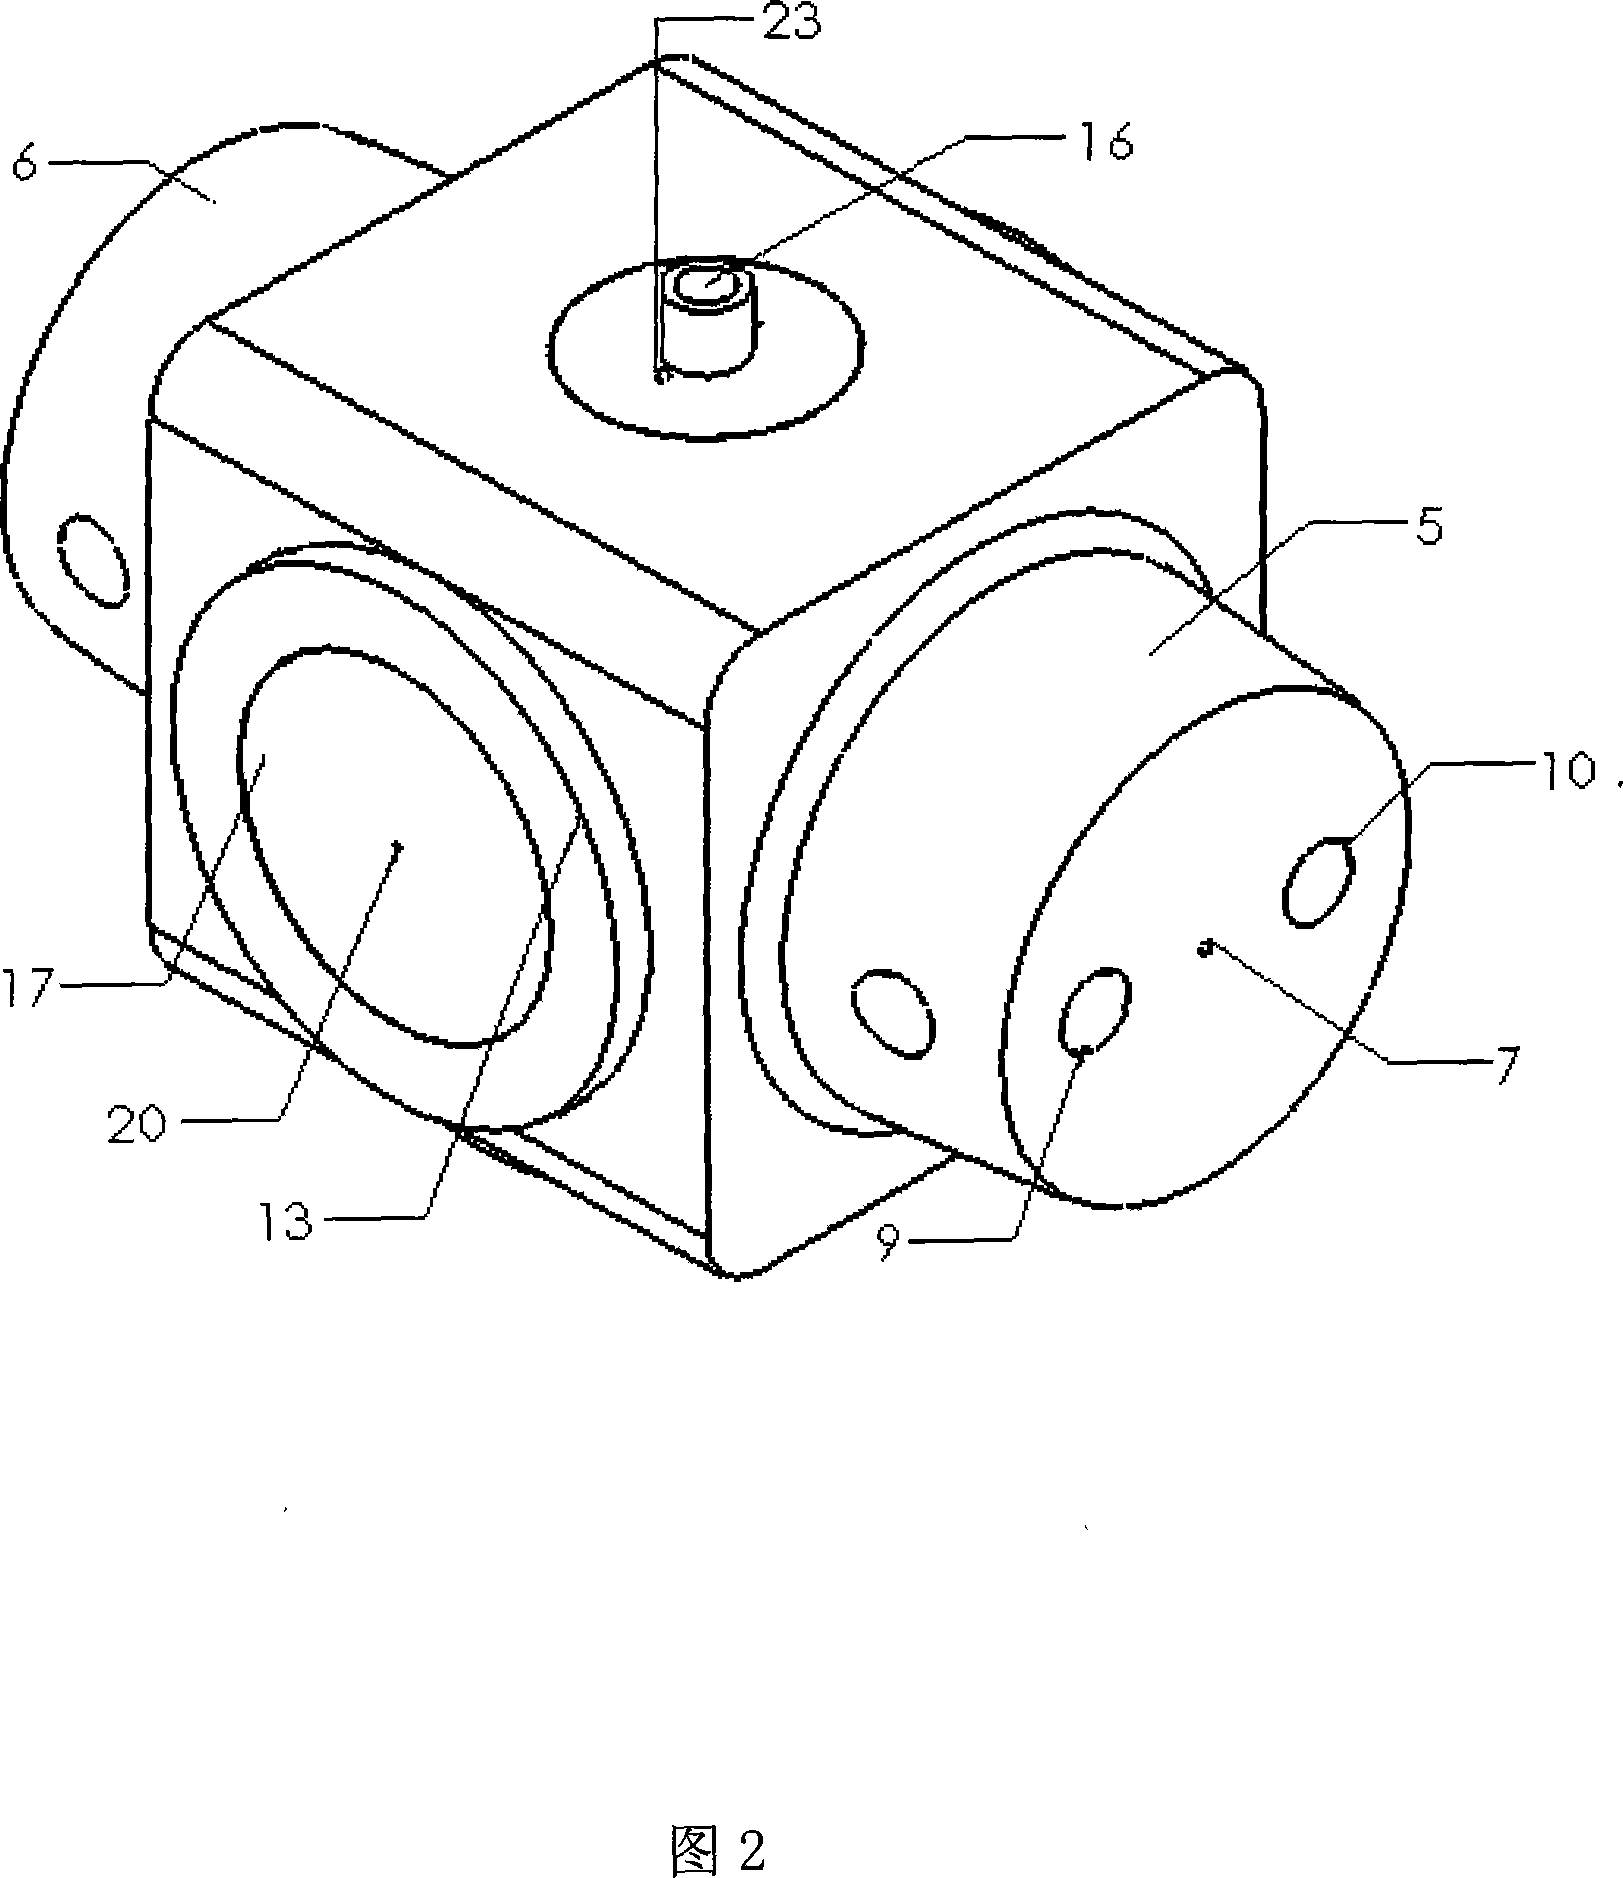 Non-contact tonometery and device